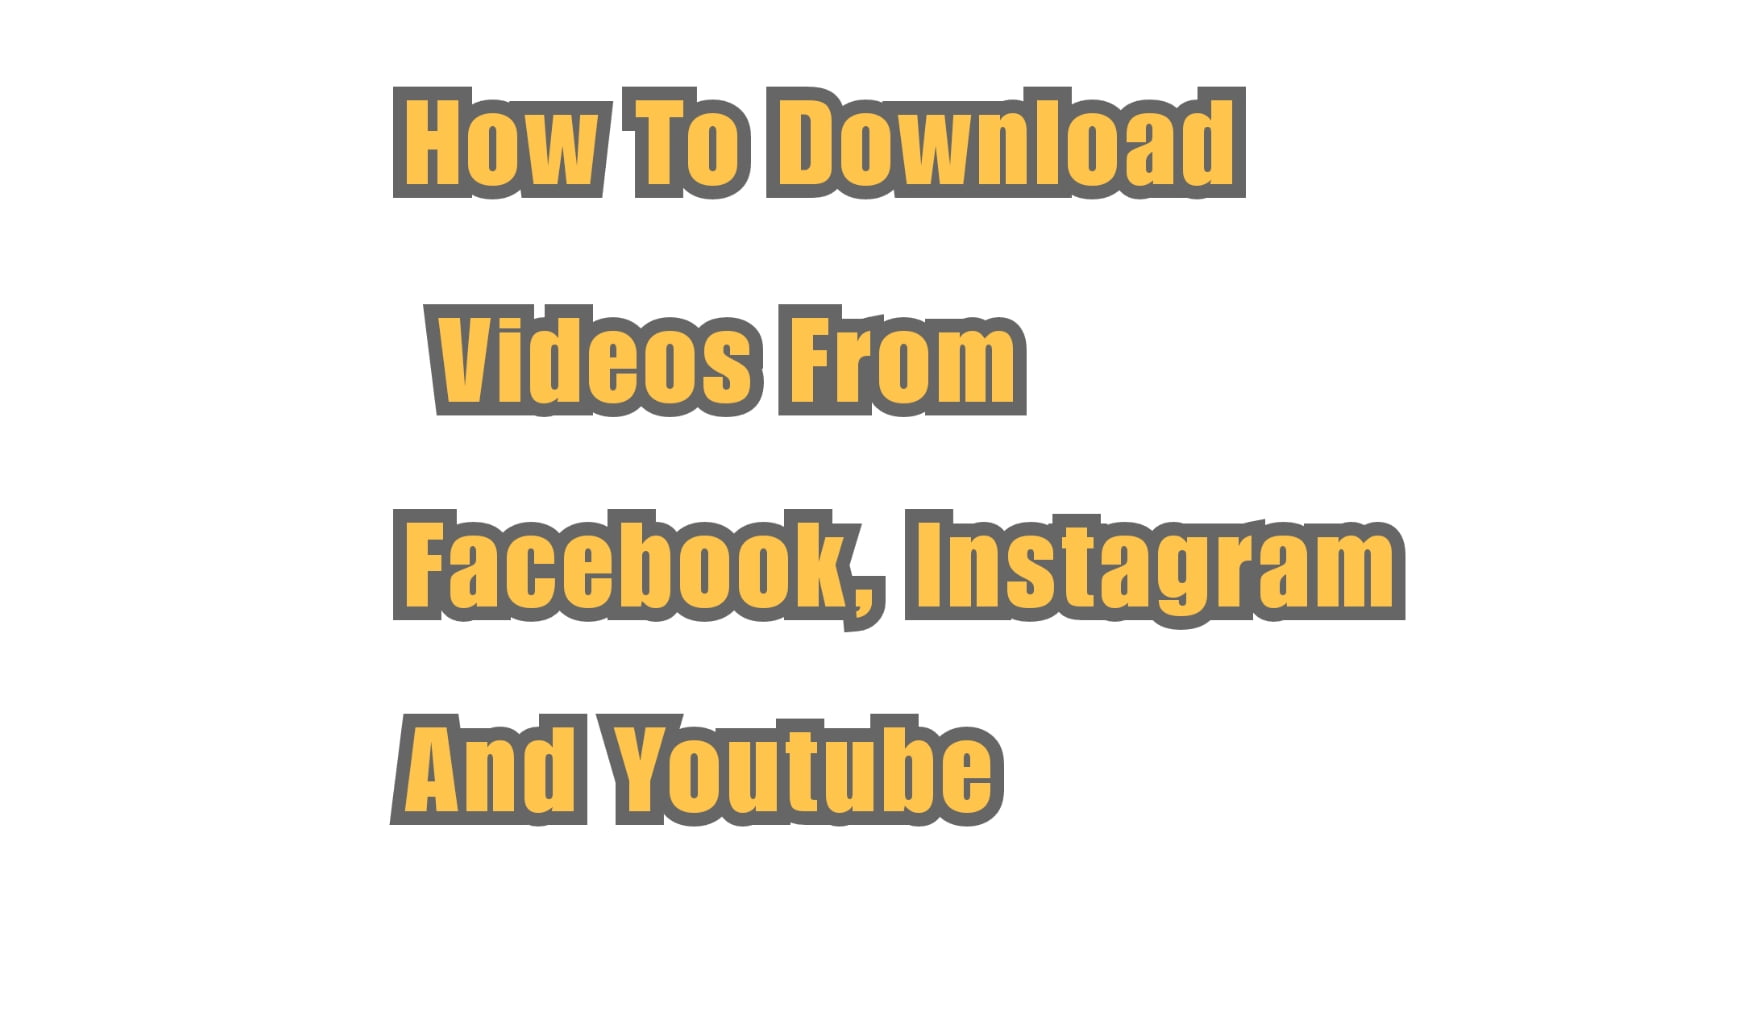 How To Download Videos From Facebook, Twitter, IG In 2021